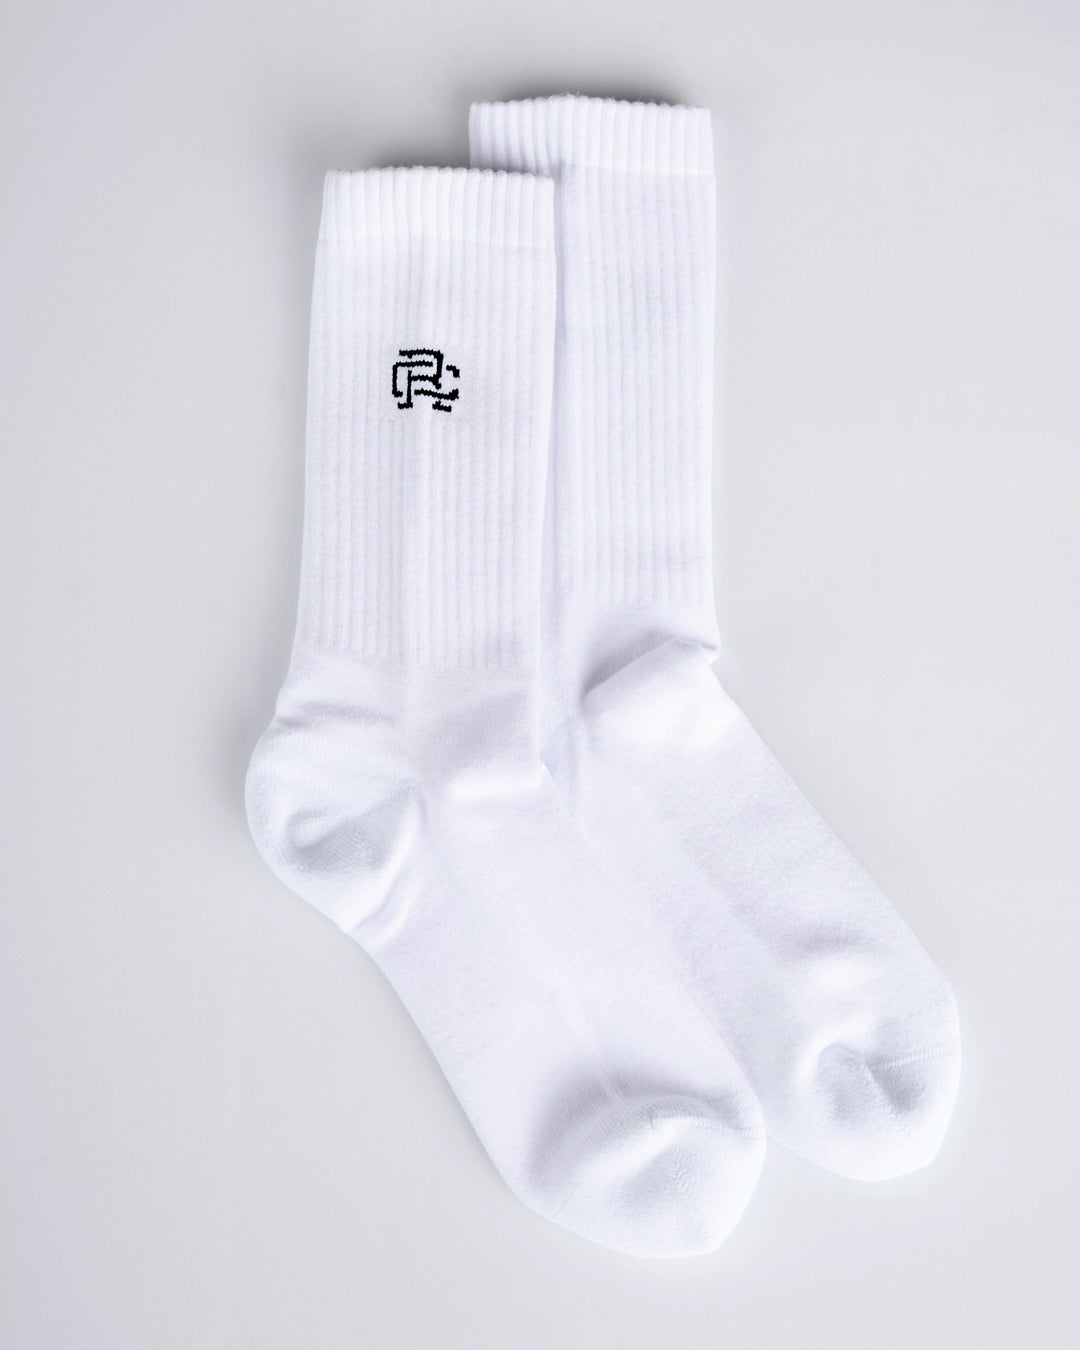 Reigning Champ Knit Classic Crew Sock White/Black